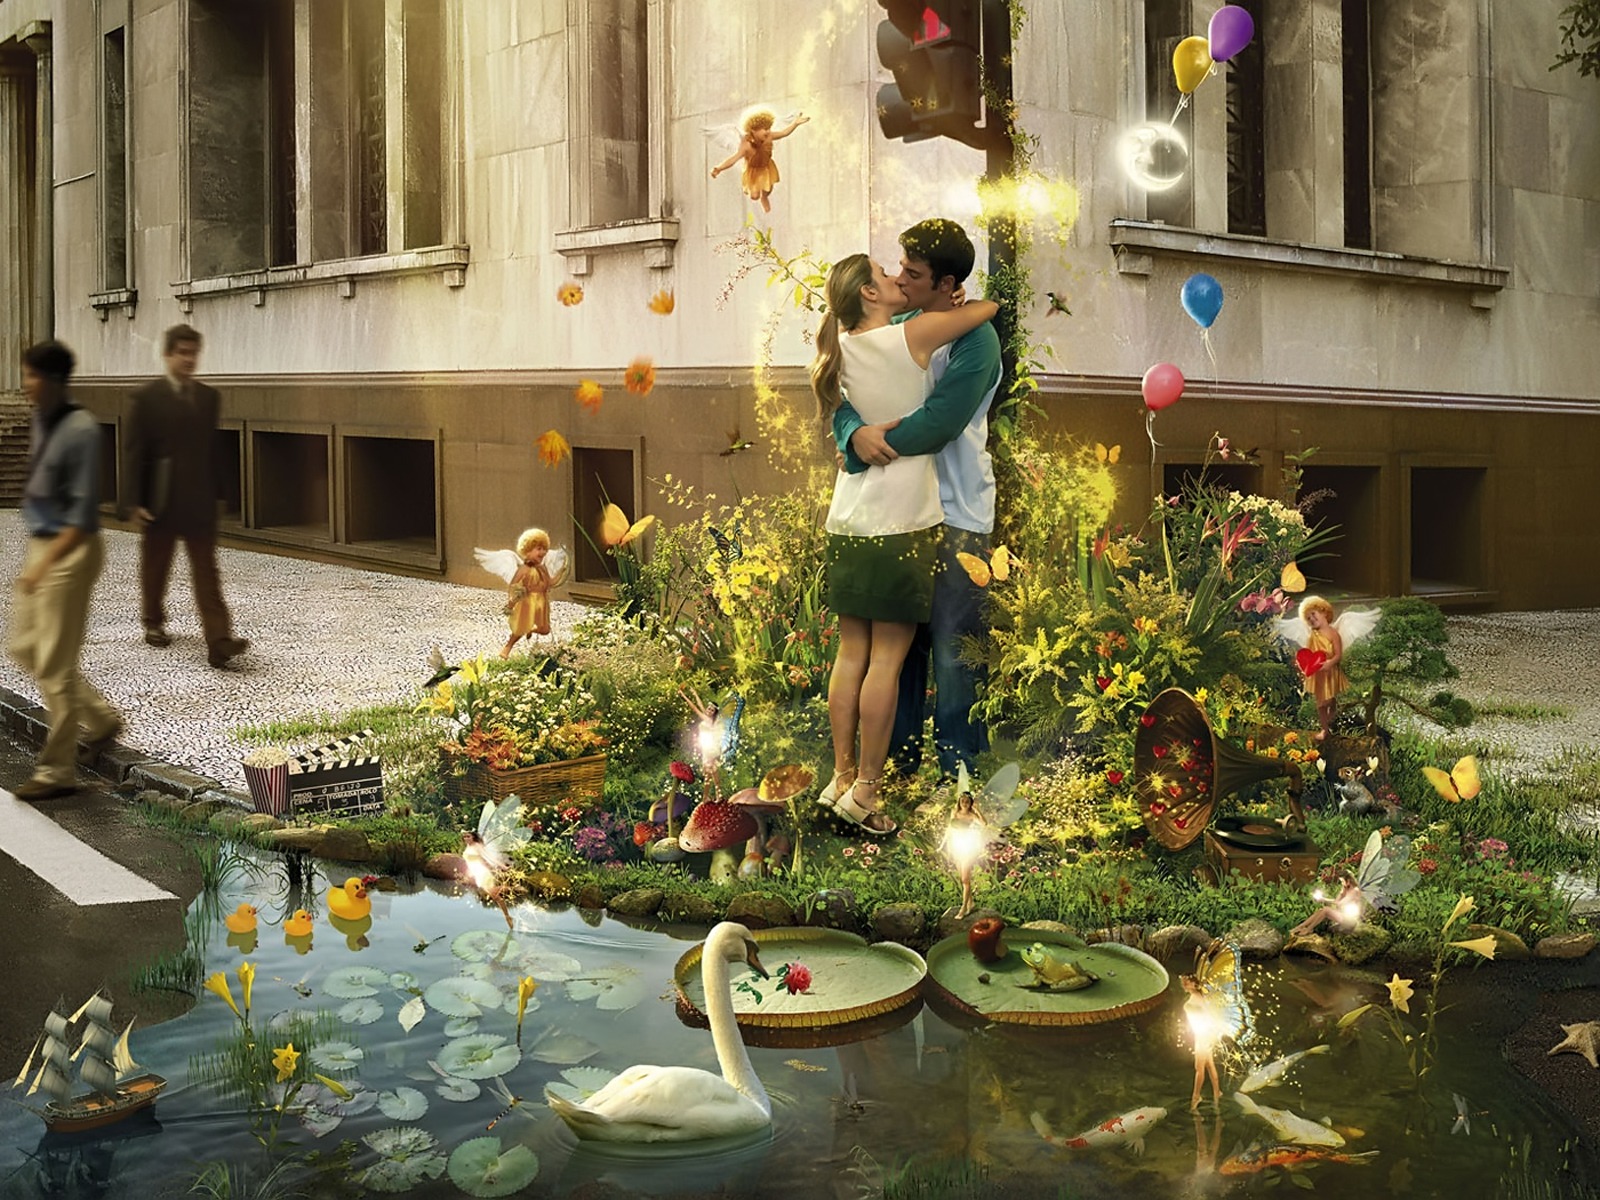 http://74211.com/wallpaper/picture_big/Amazing-Nature-Landscape-Street-Kiss-Love-Angels-Around-See-Only-Each-Other-in-the-Eyes.jpg